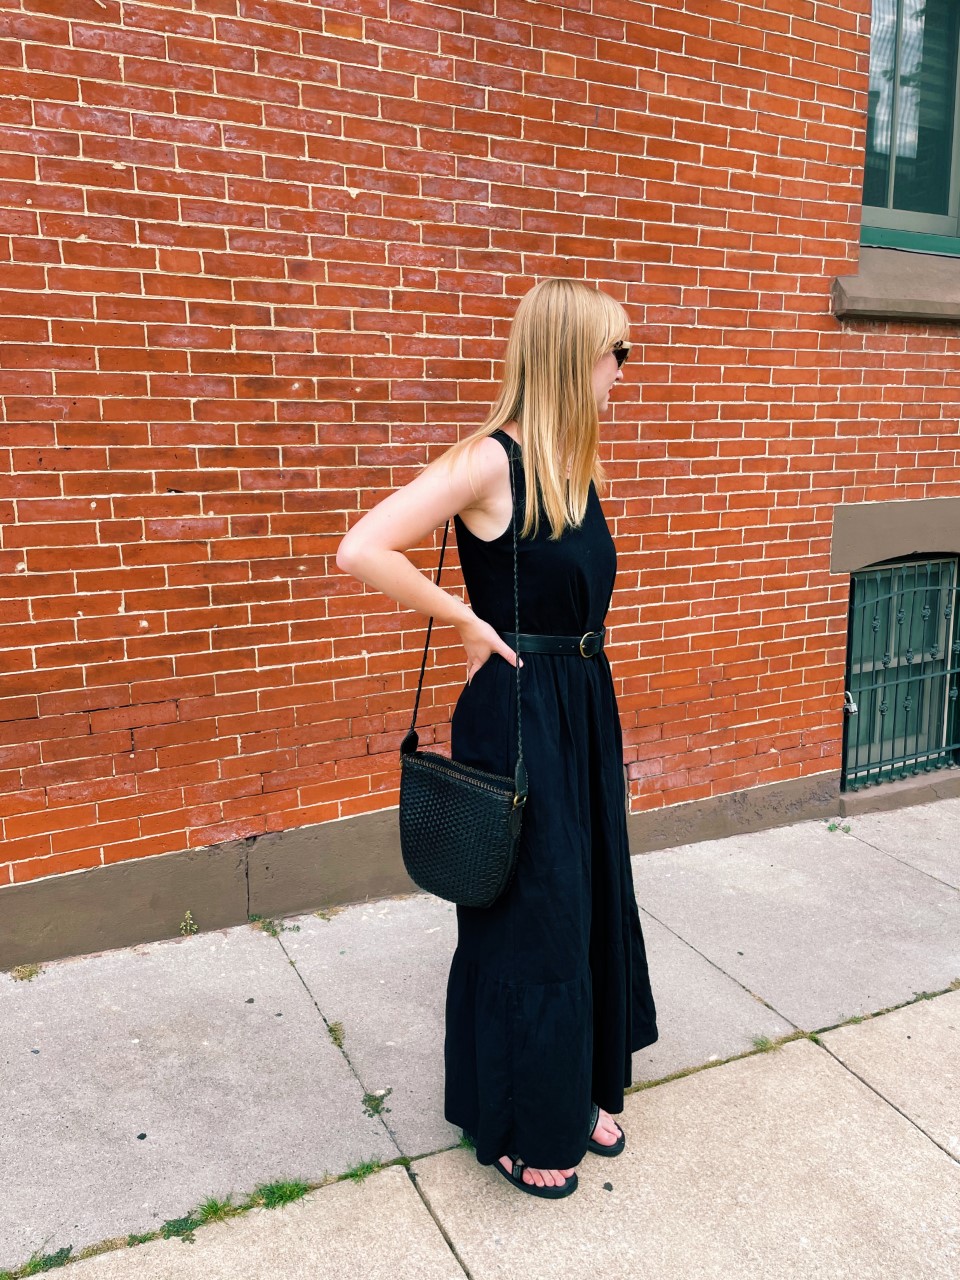 Styling a Black Maxi Dress for Summer | Organized Mess